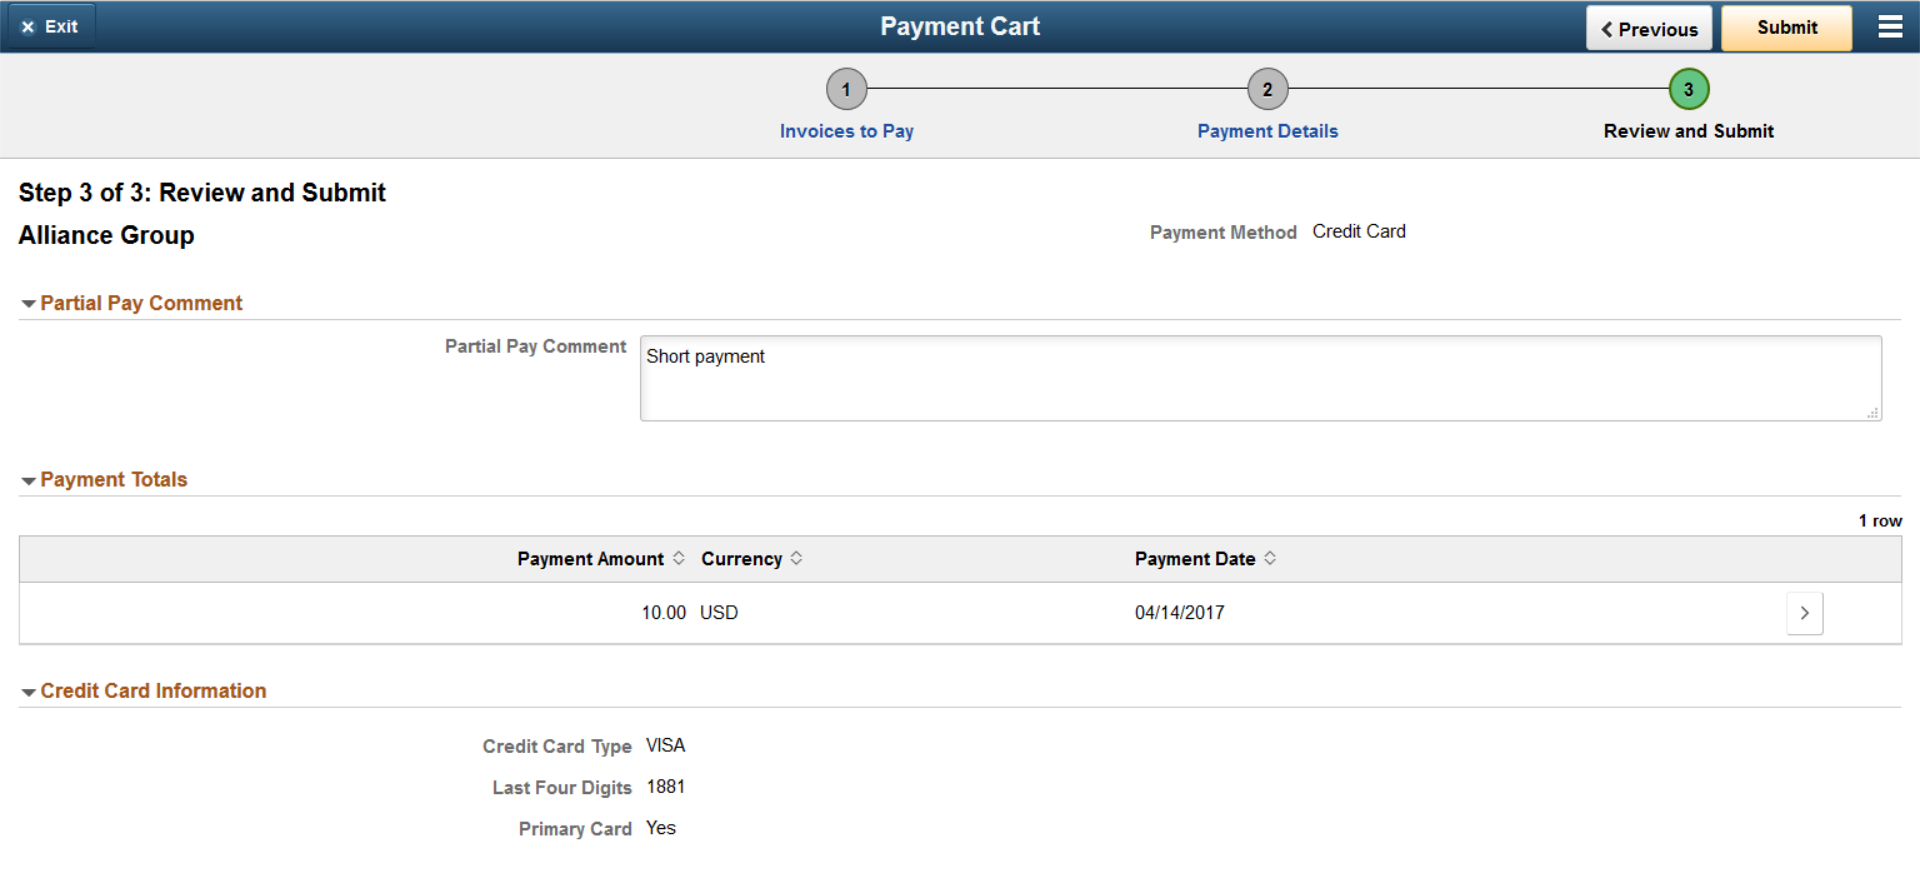 Step 3 of 3: Review and Submit a credit card payment (LFF)